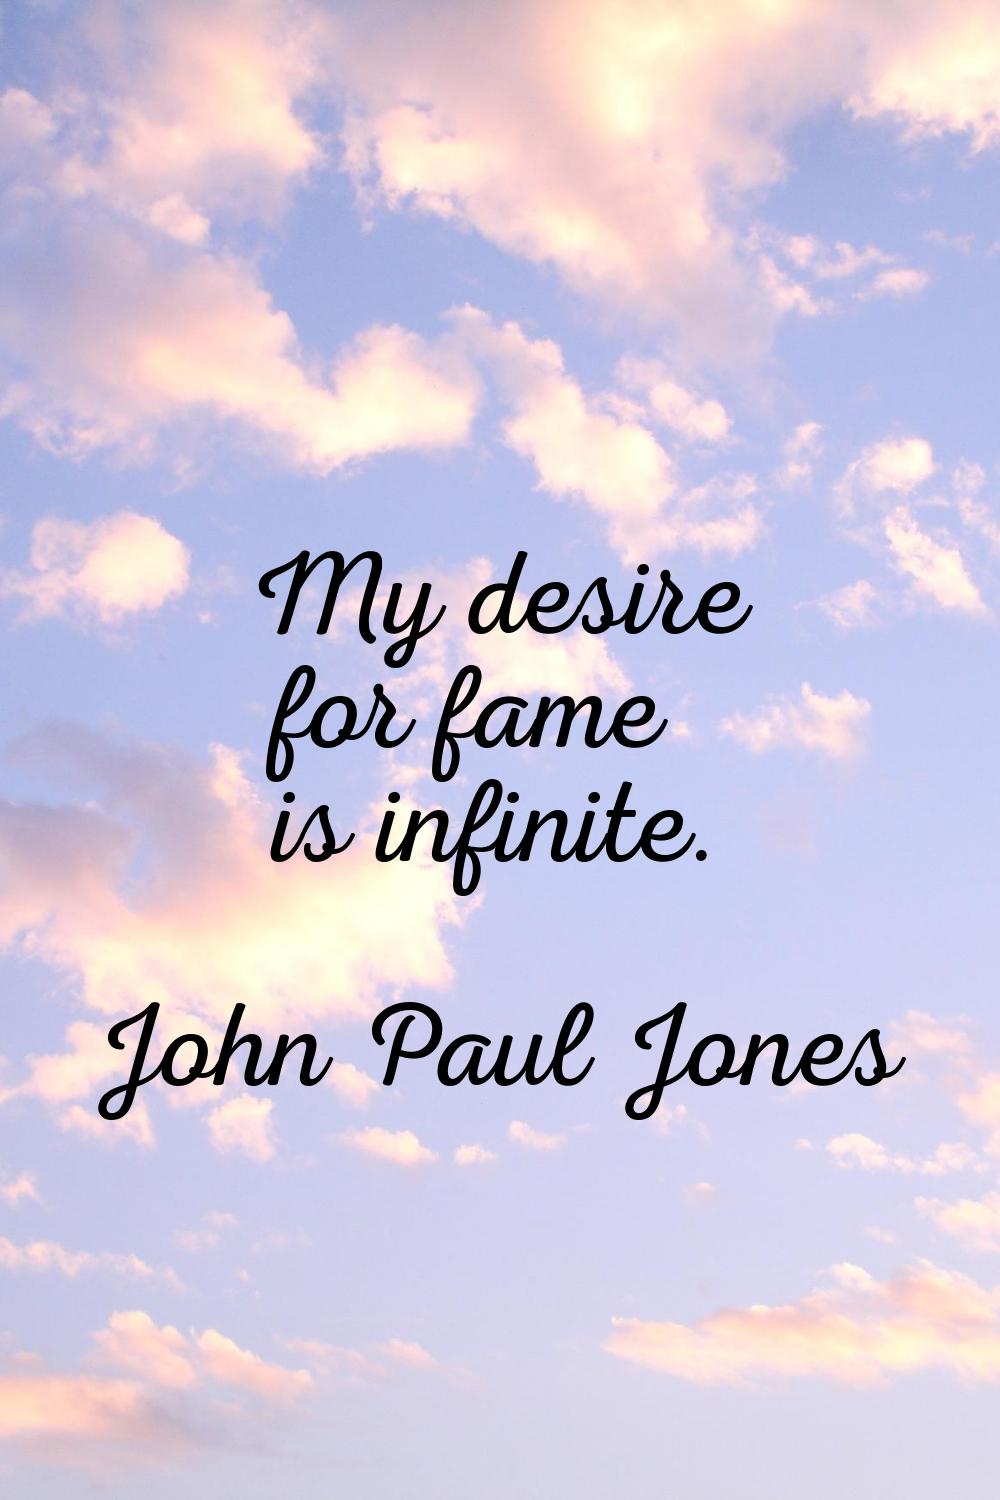 My desire for fame is infinite.